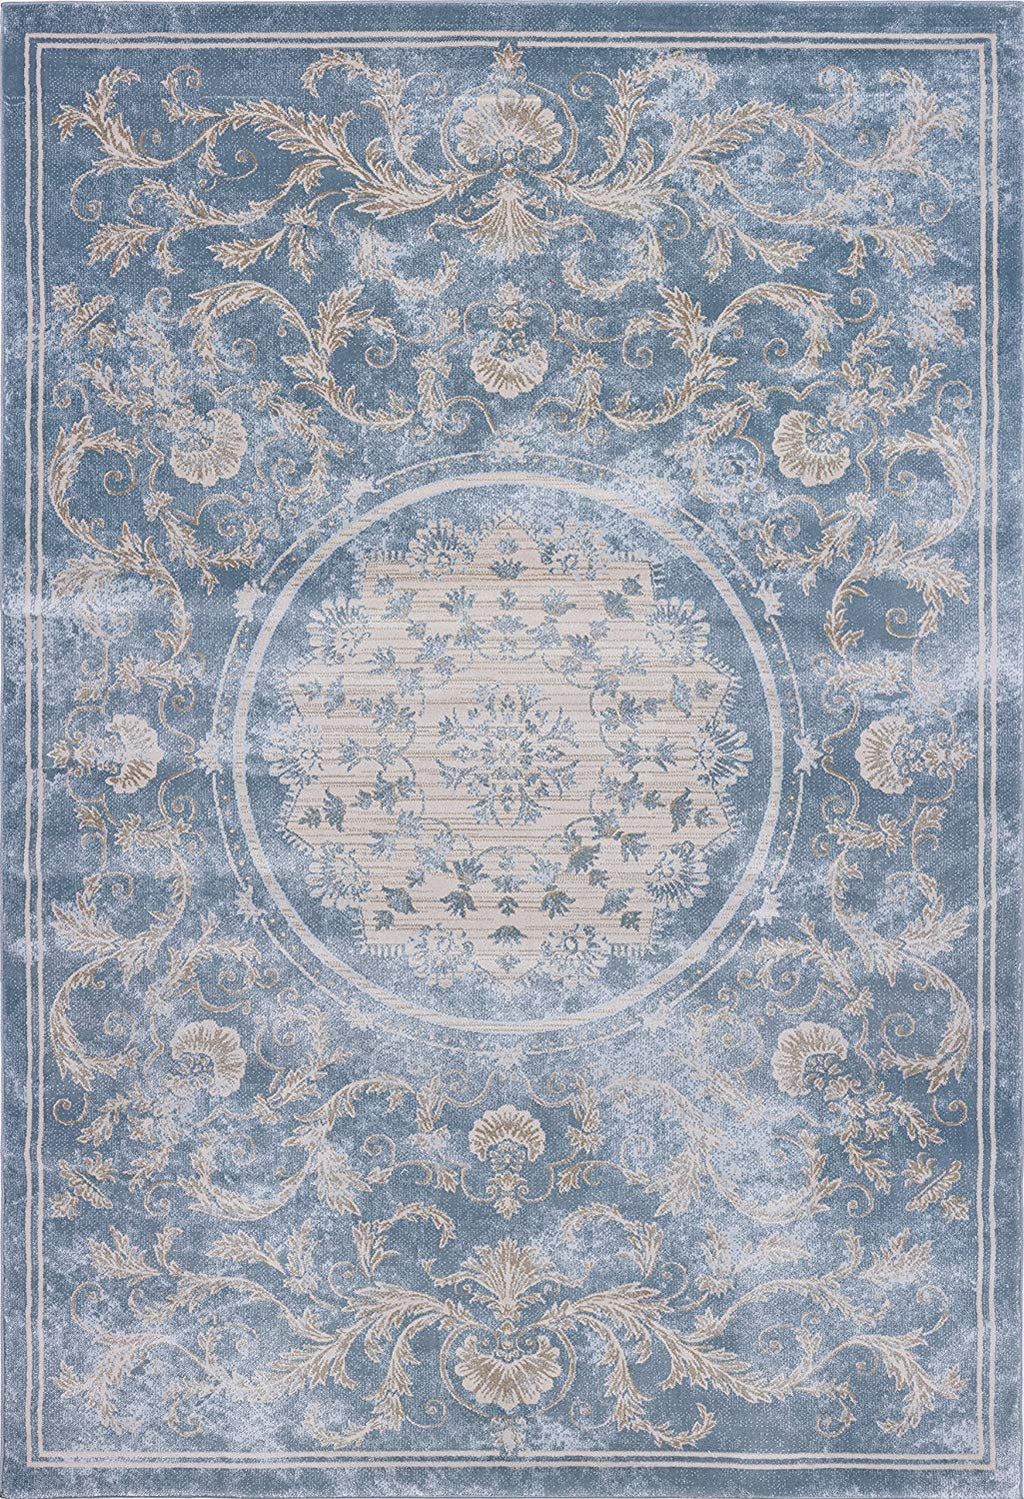 Pierre Cardin Home Cosmos Collection Area Rugs – Pierre Cardin Rugs